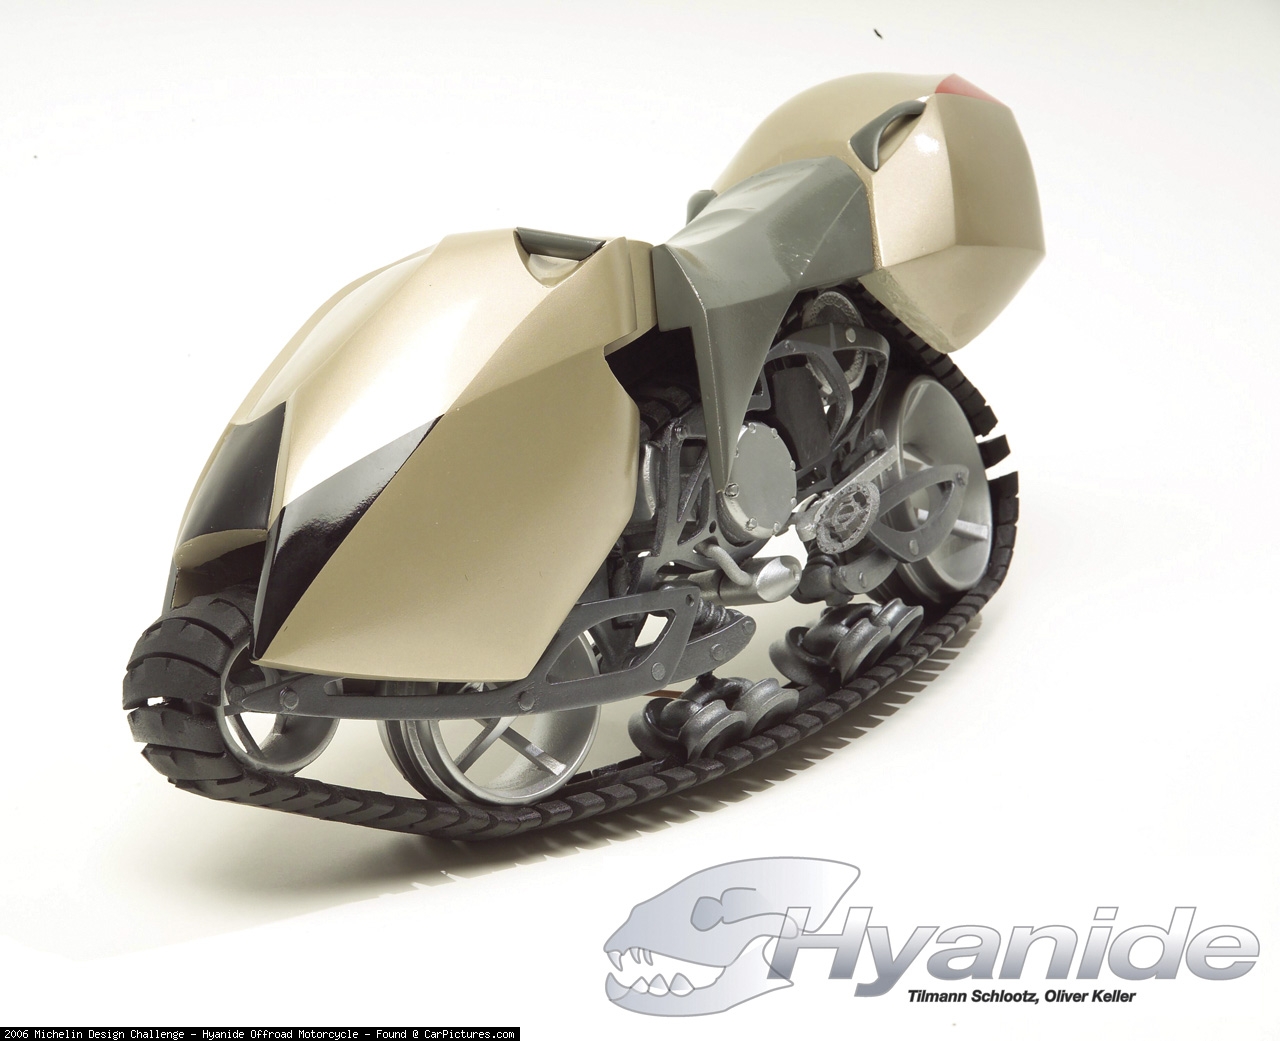 Michelin Design Hyanide Offroad Motorcycle photo 44650